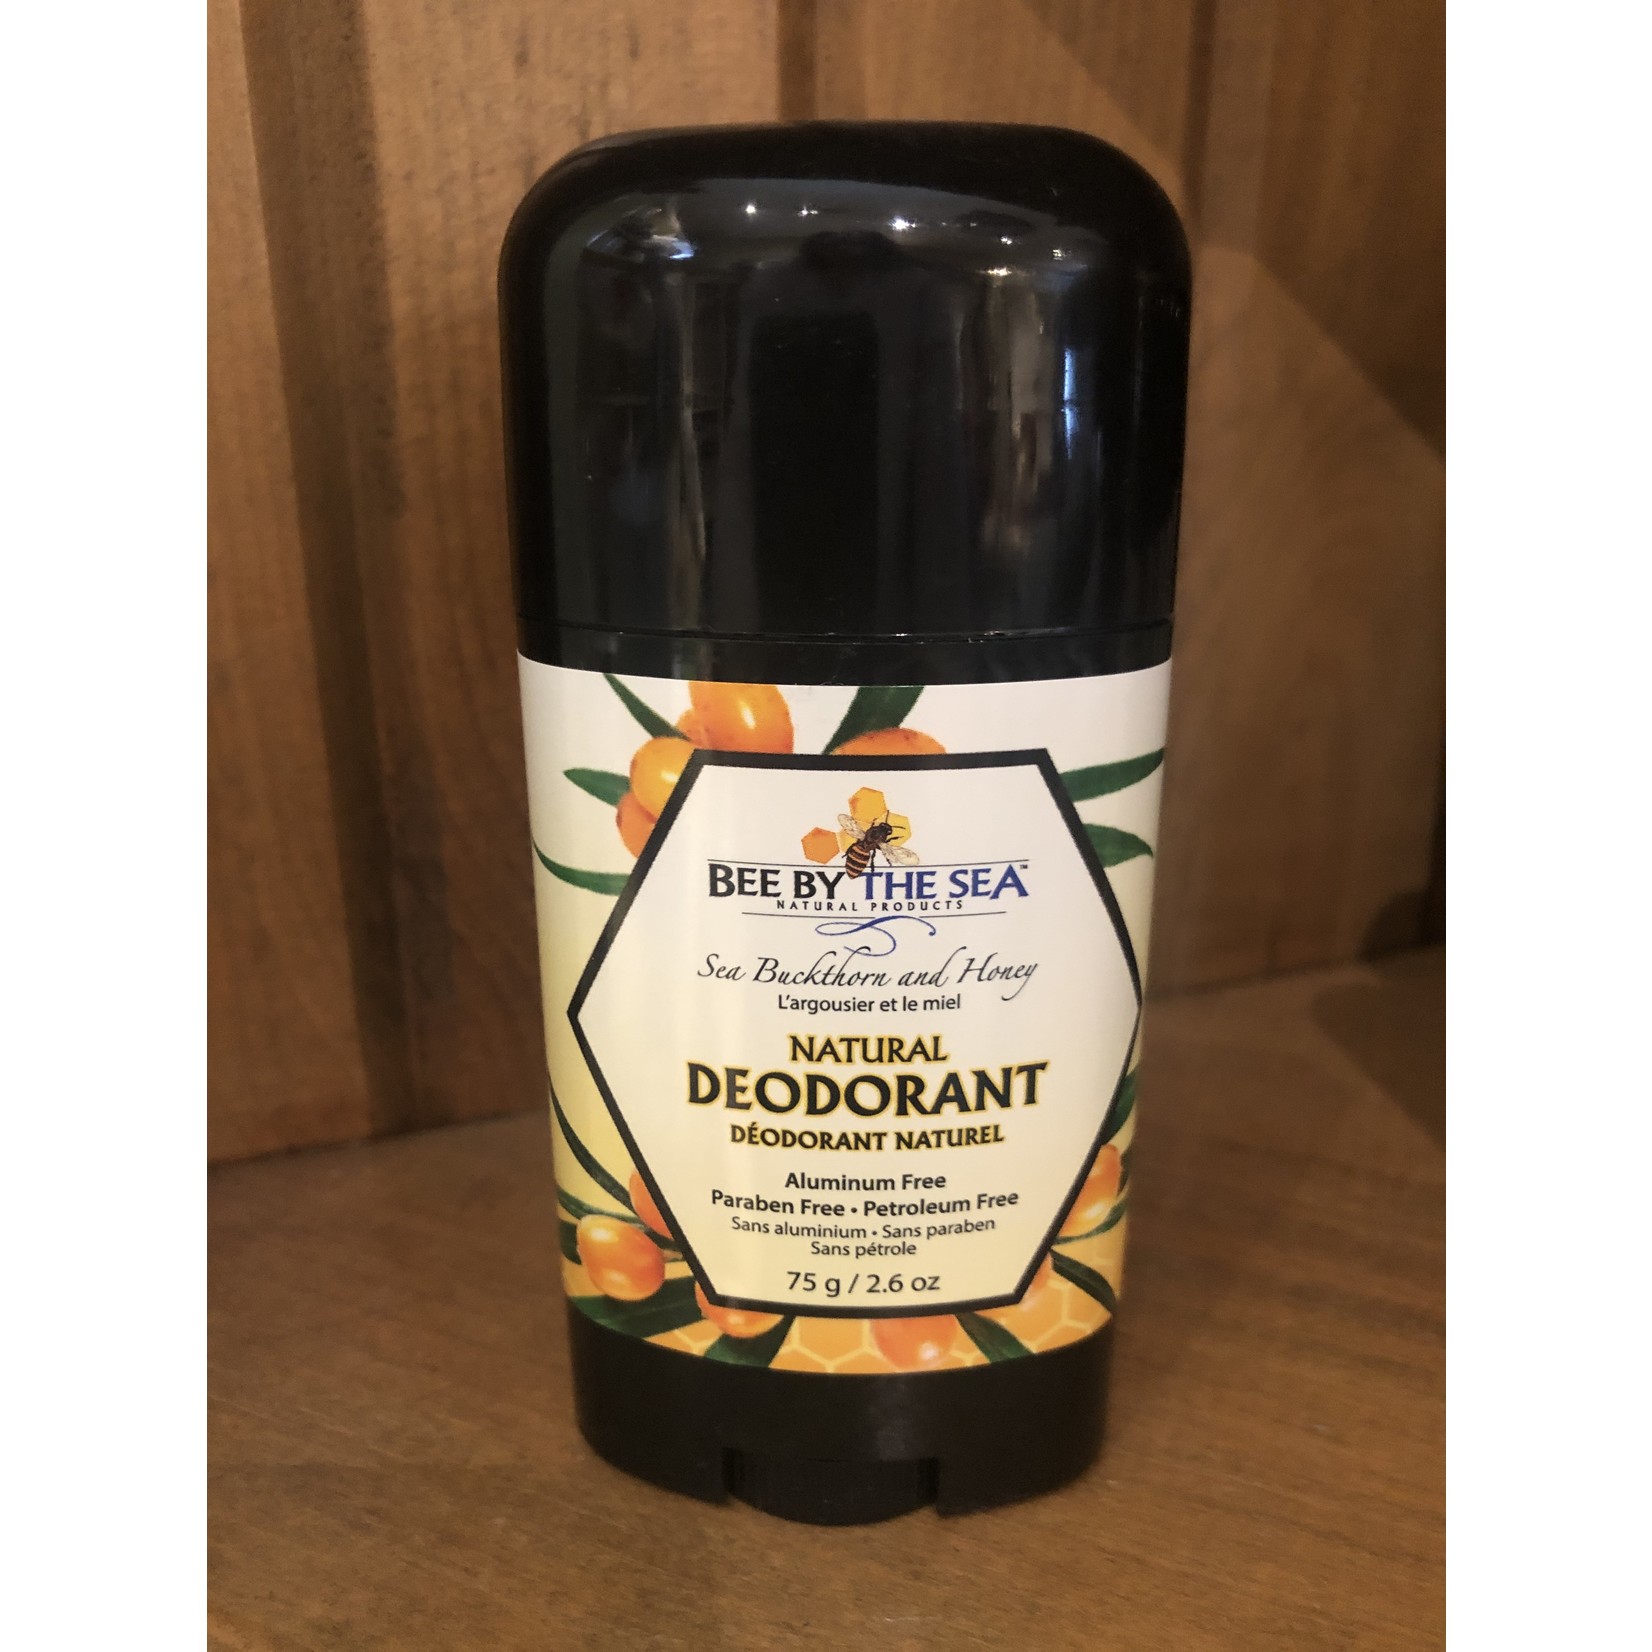 Bee by the Sea Deodorant